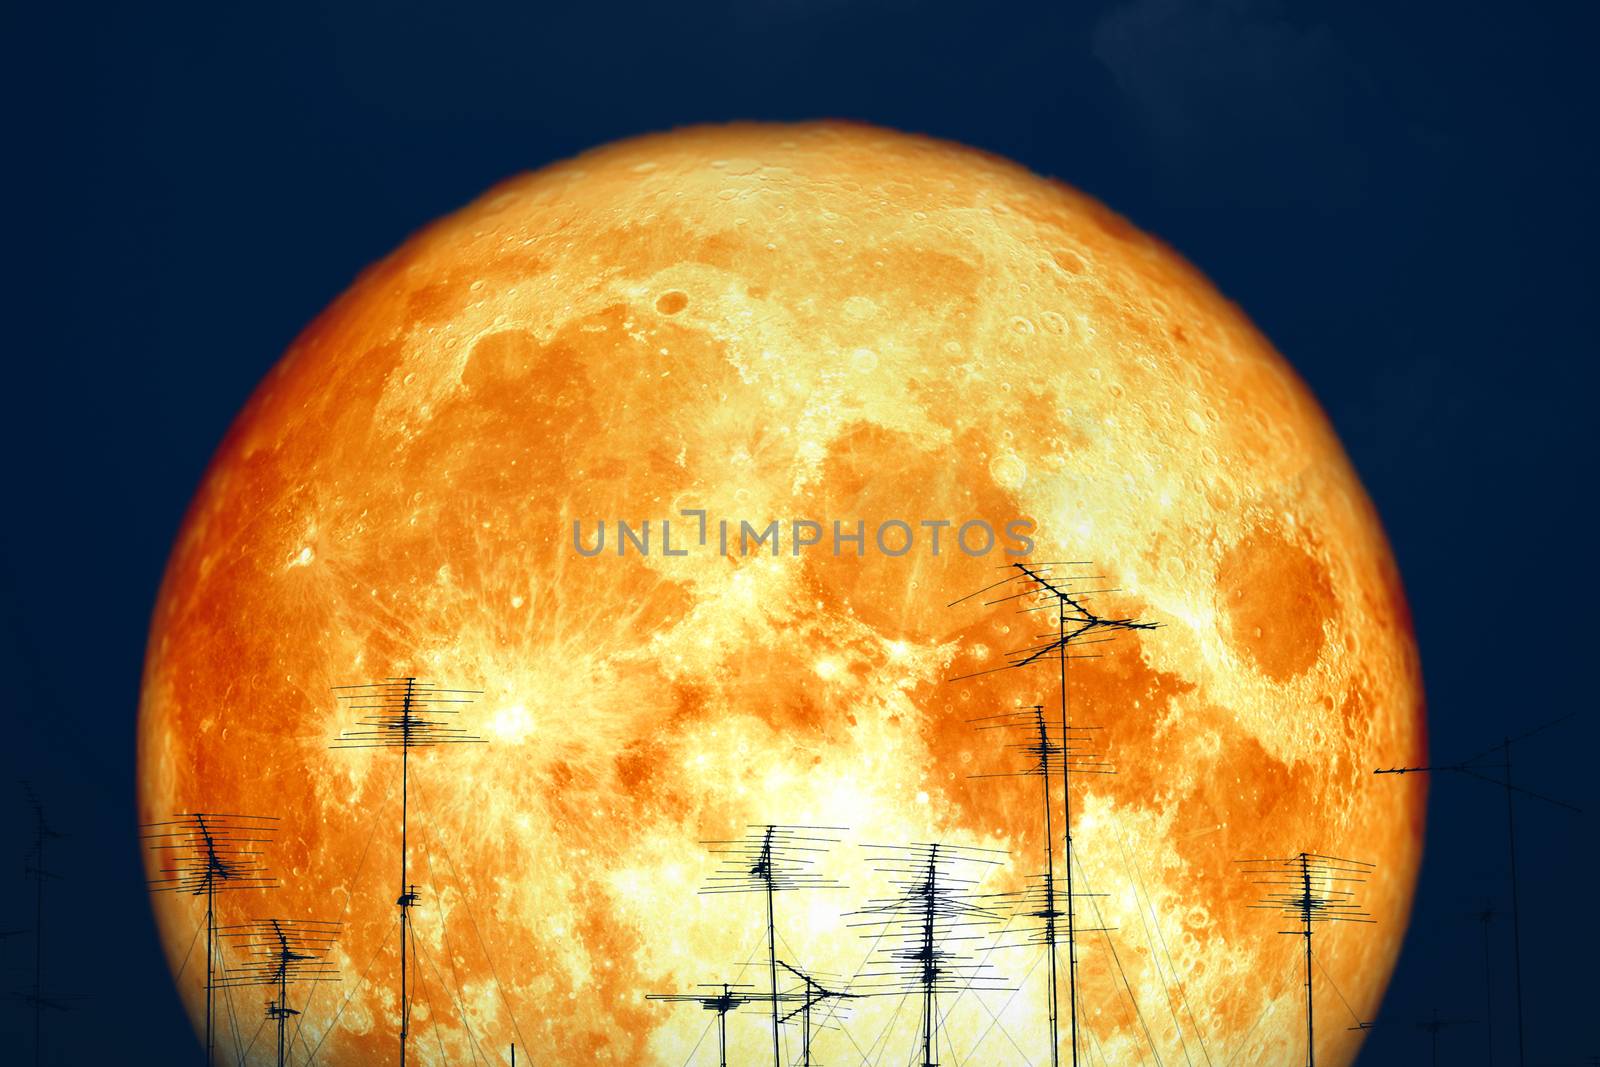 full milk blood moon back on silhouette antennas on night sky, Elements of this image furnished by NASA